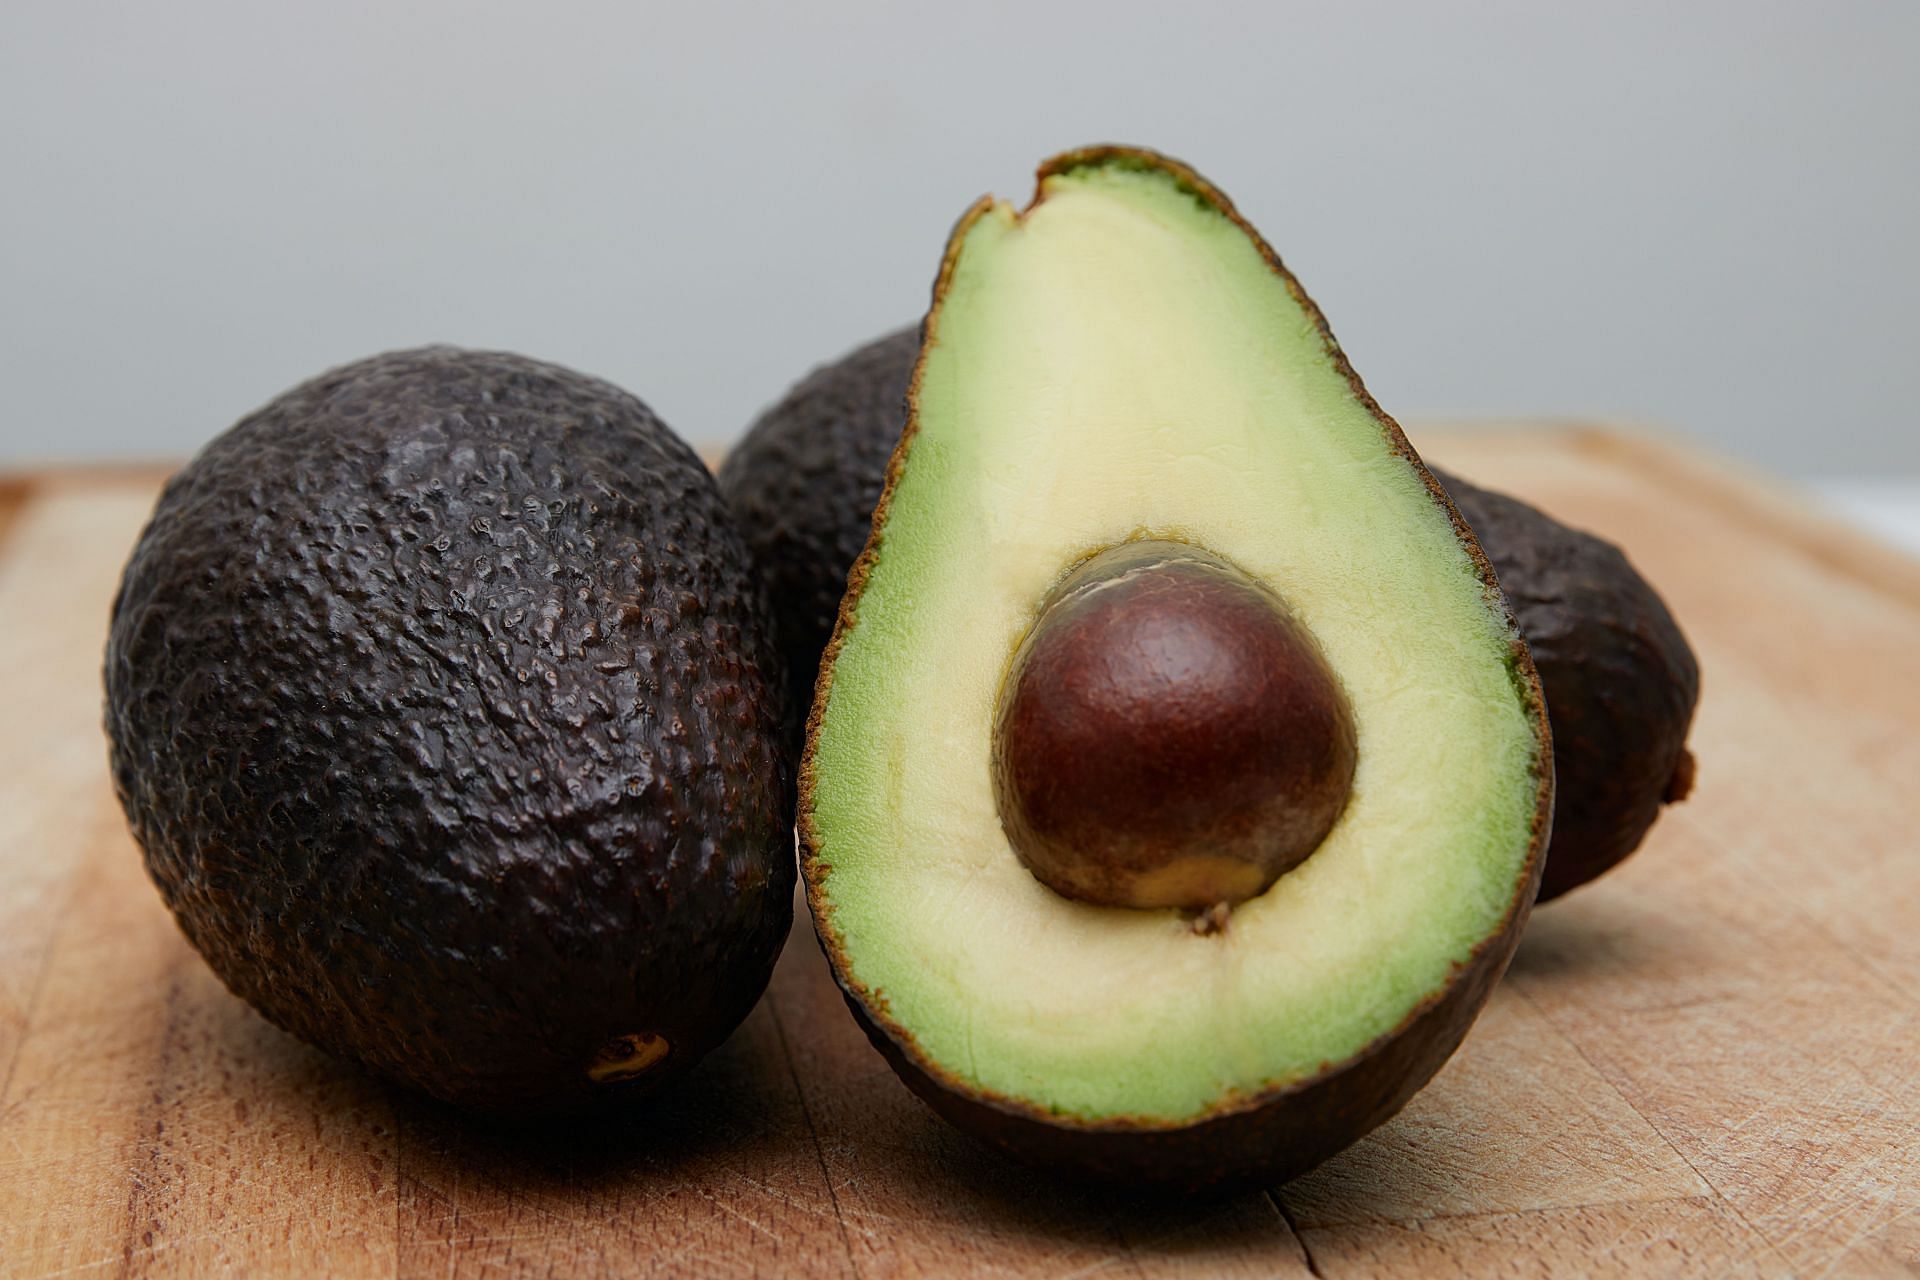 Avocados are a great source of monounsaturated fats as well as dietary fibers. (Image via Unsplash/GilNdjouwou)